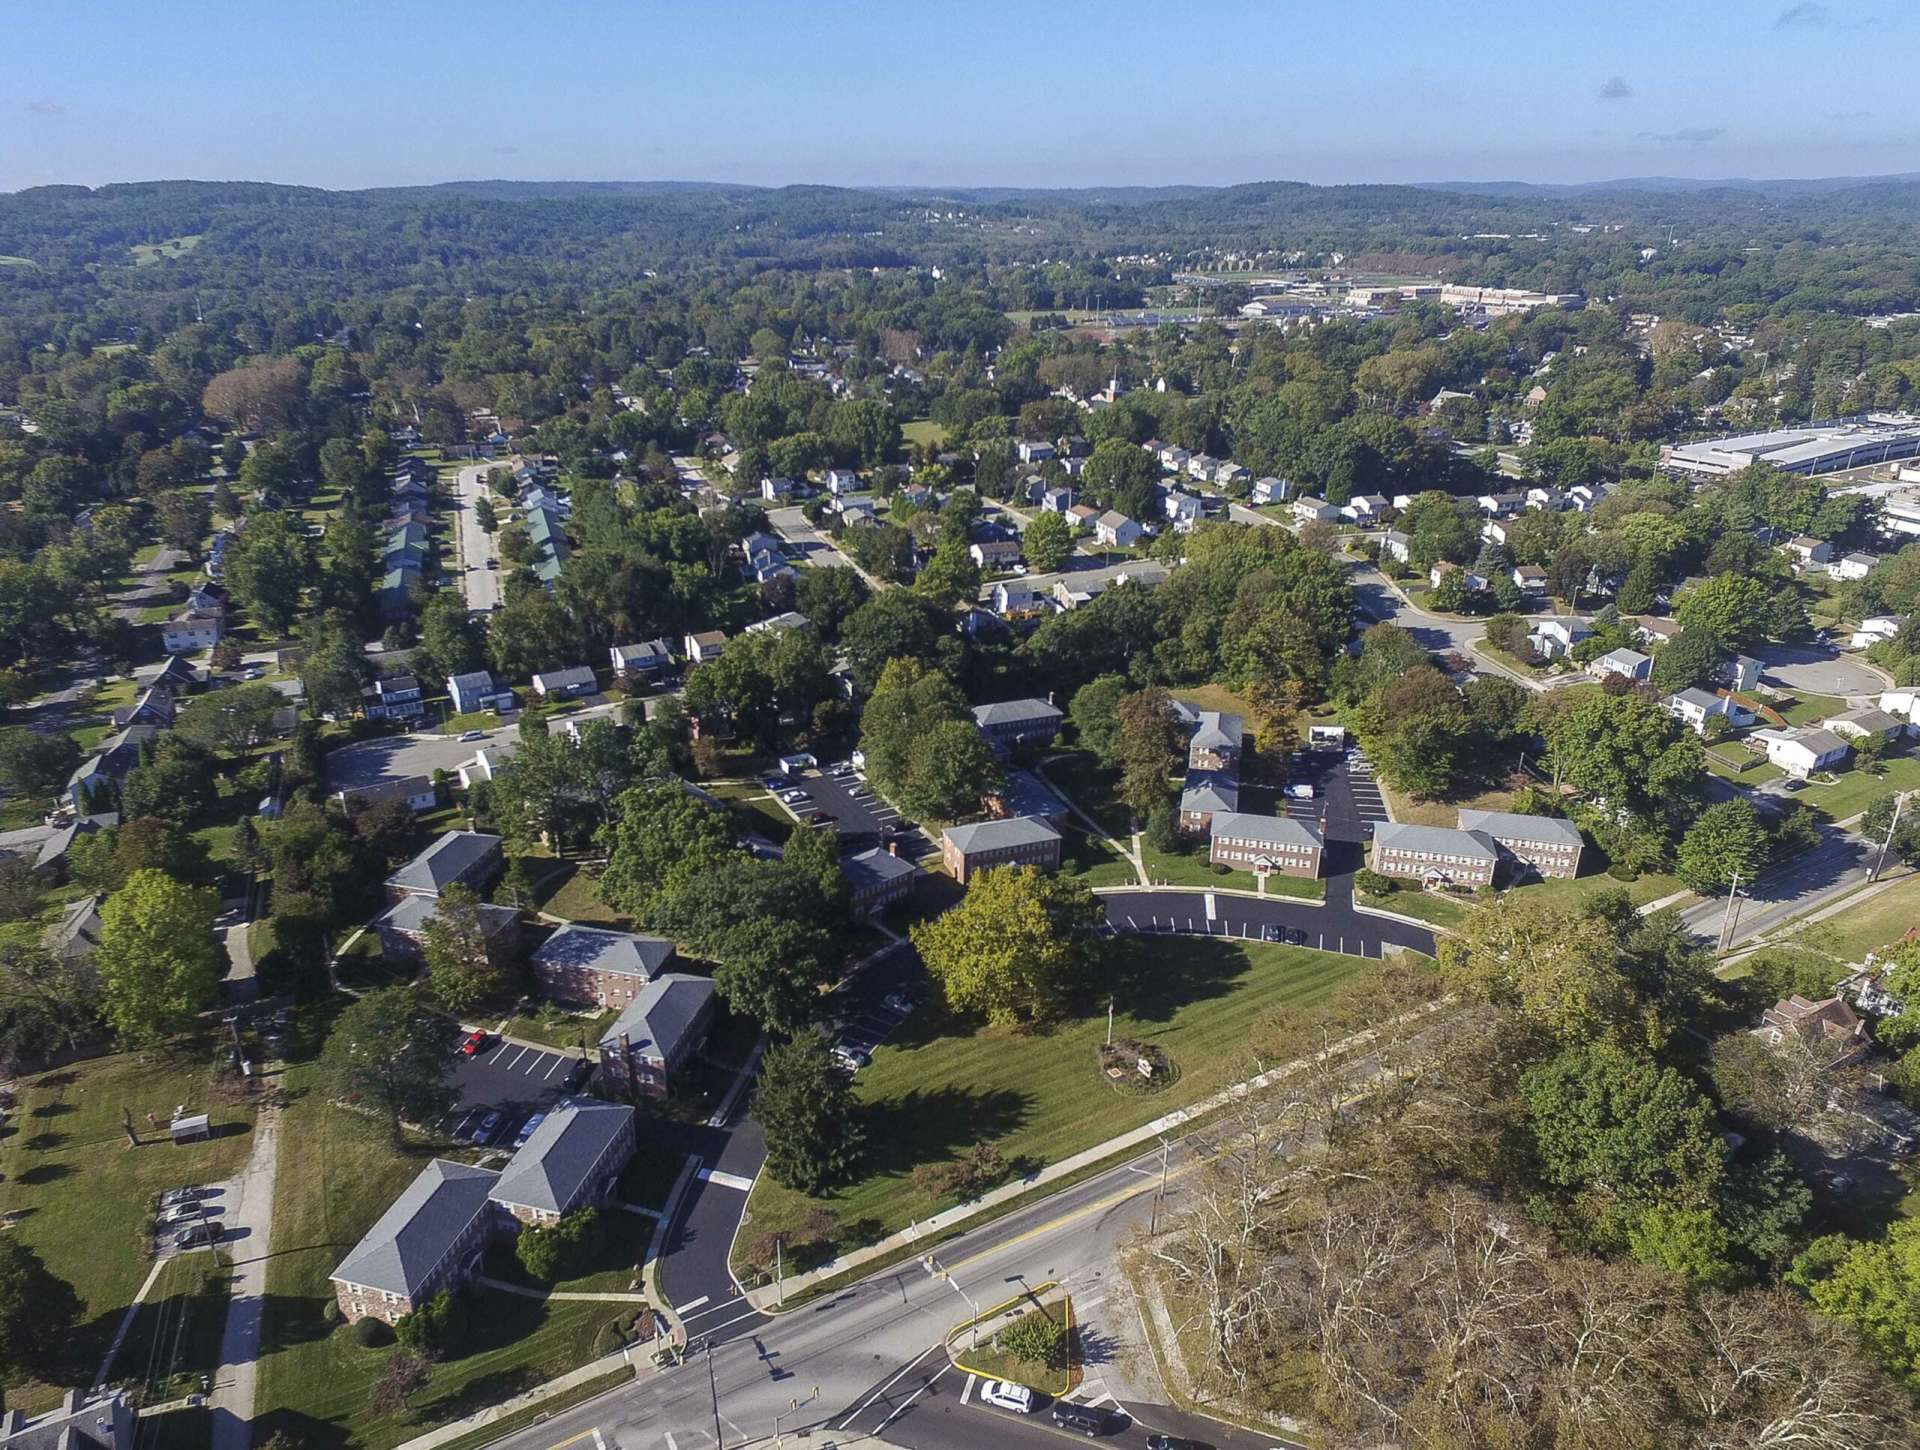 Birdseye view of Knollwood Apartments and the surrounding area.